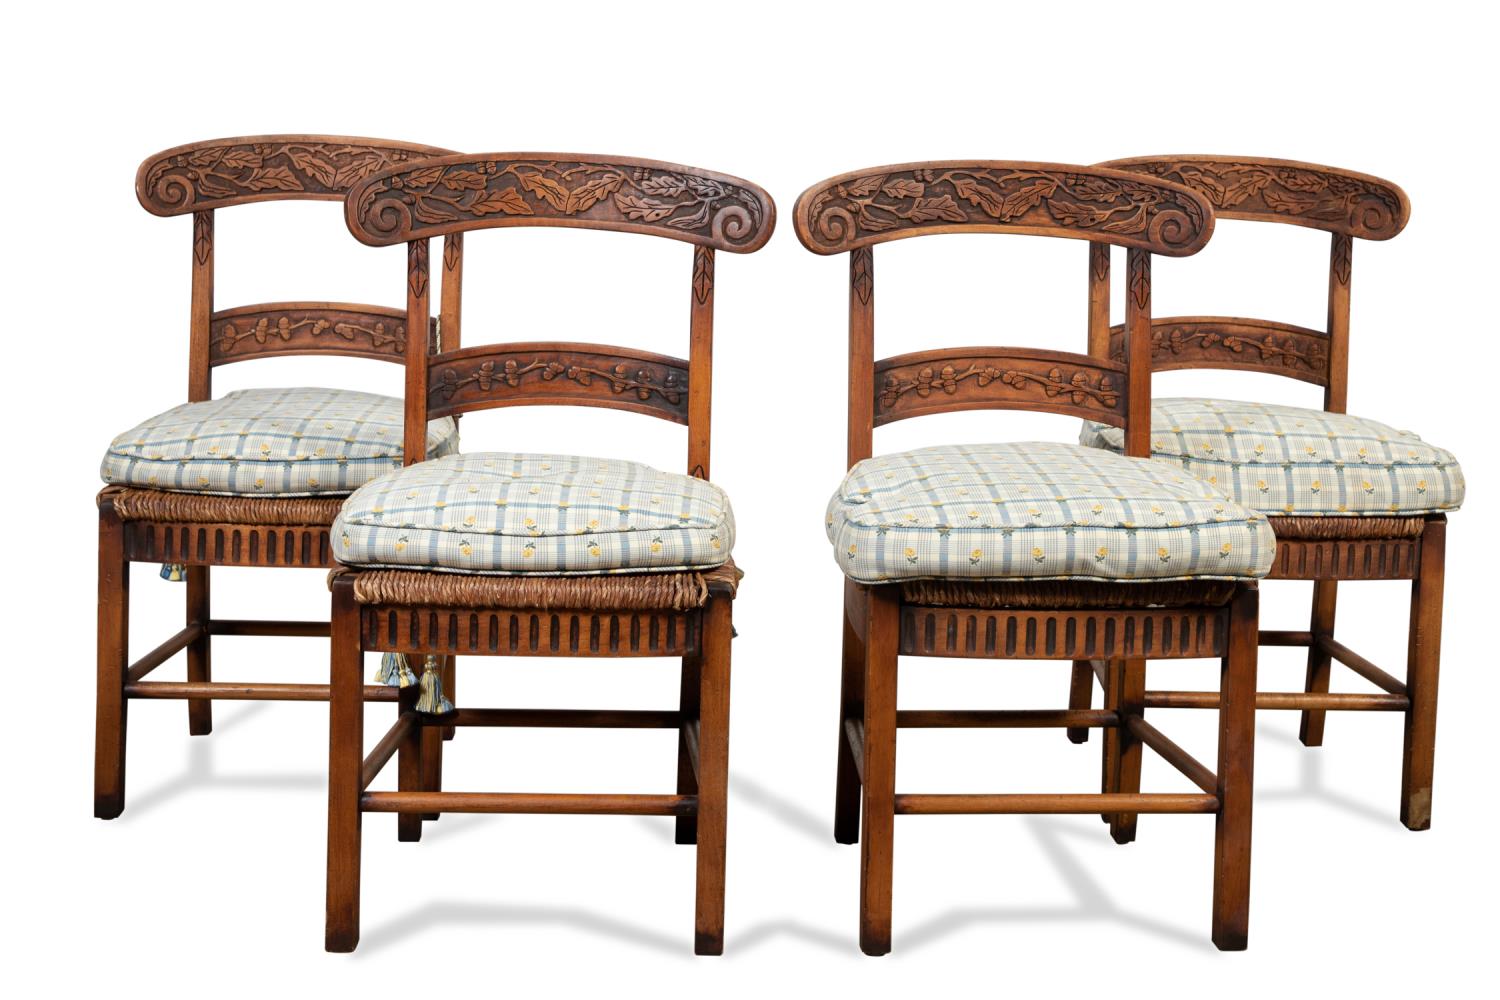 SET OF 4 FRENCH COUNTRY CHAIRS 288886